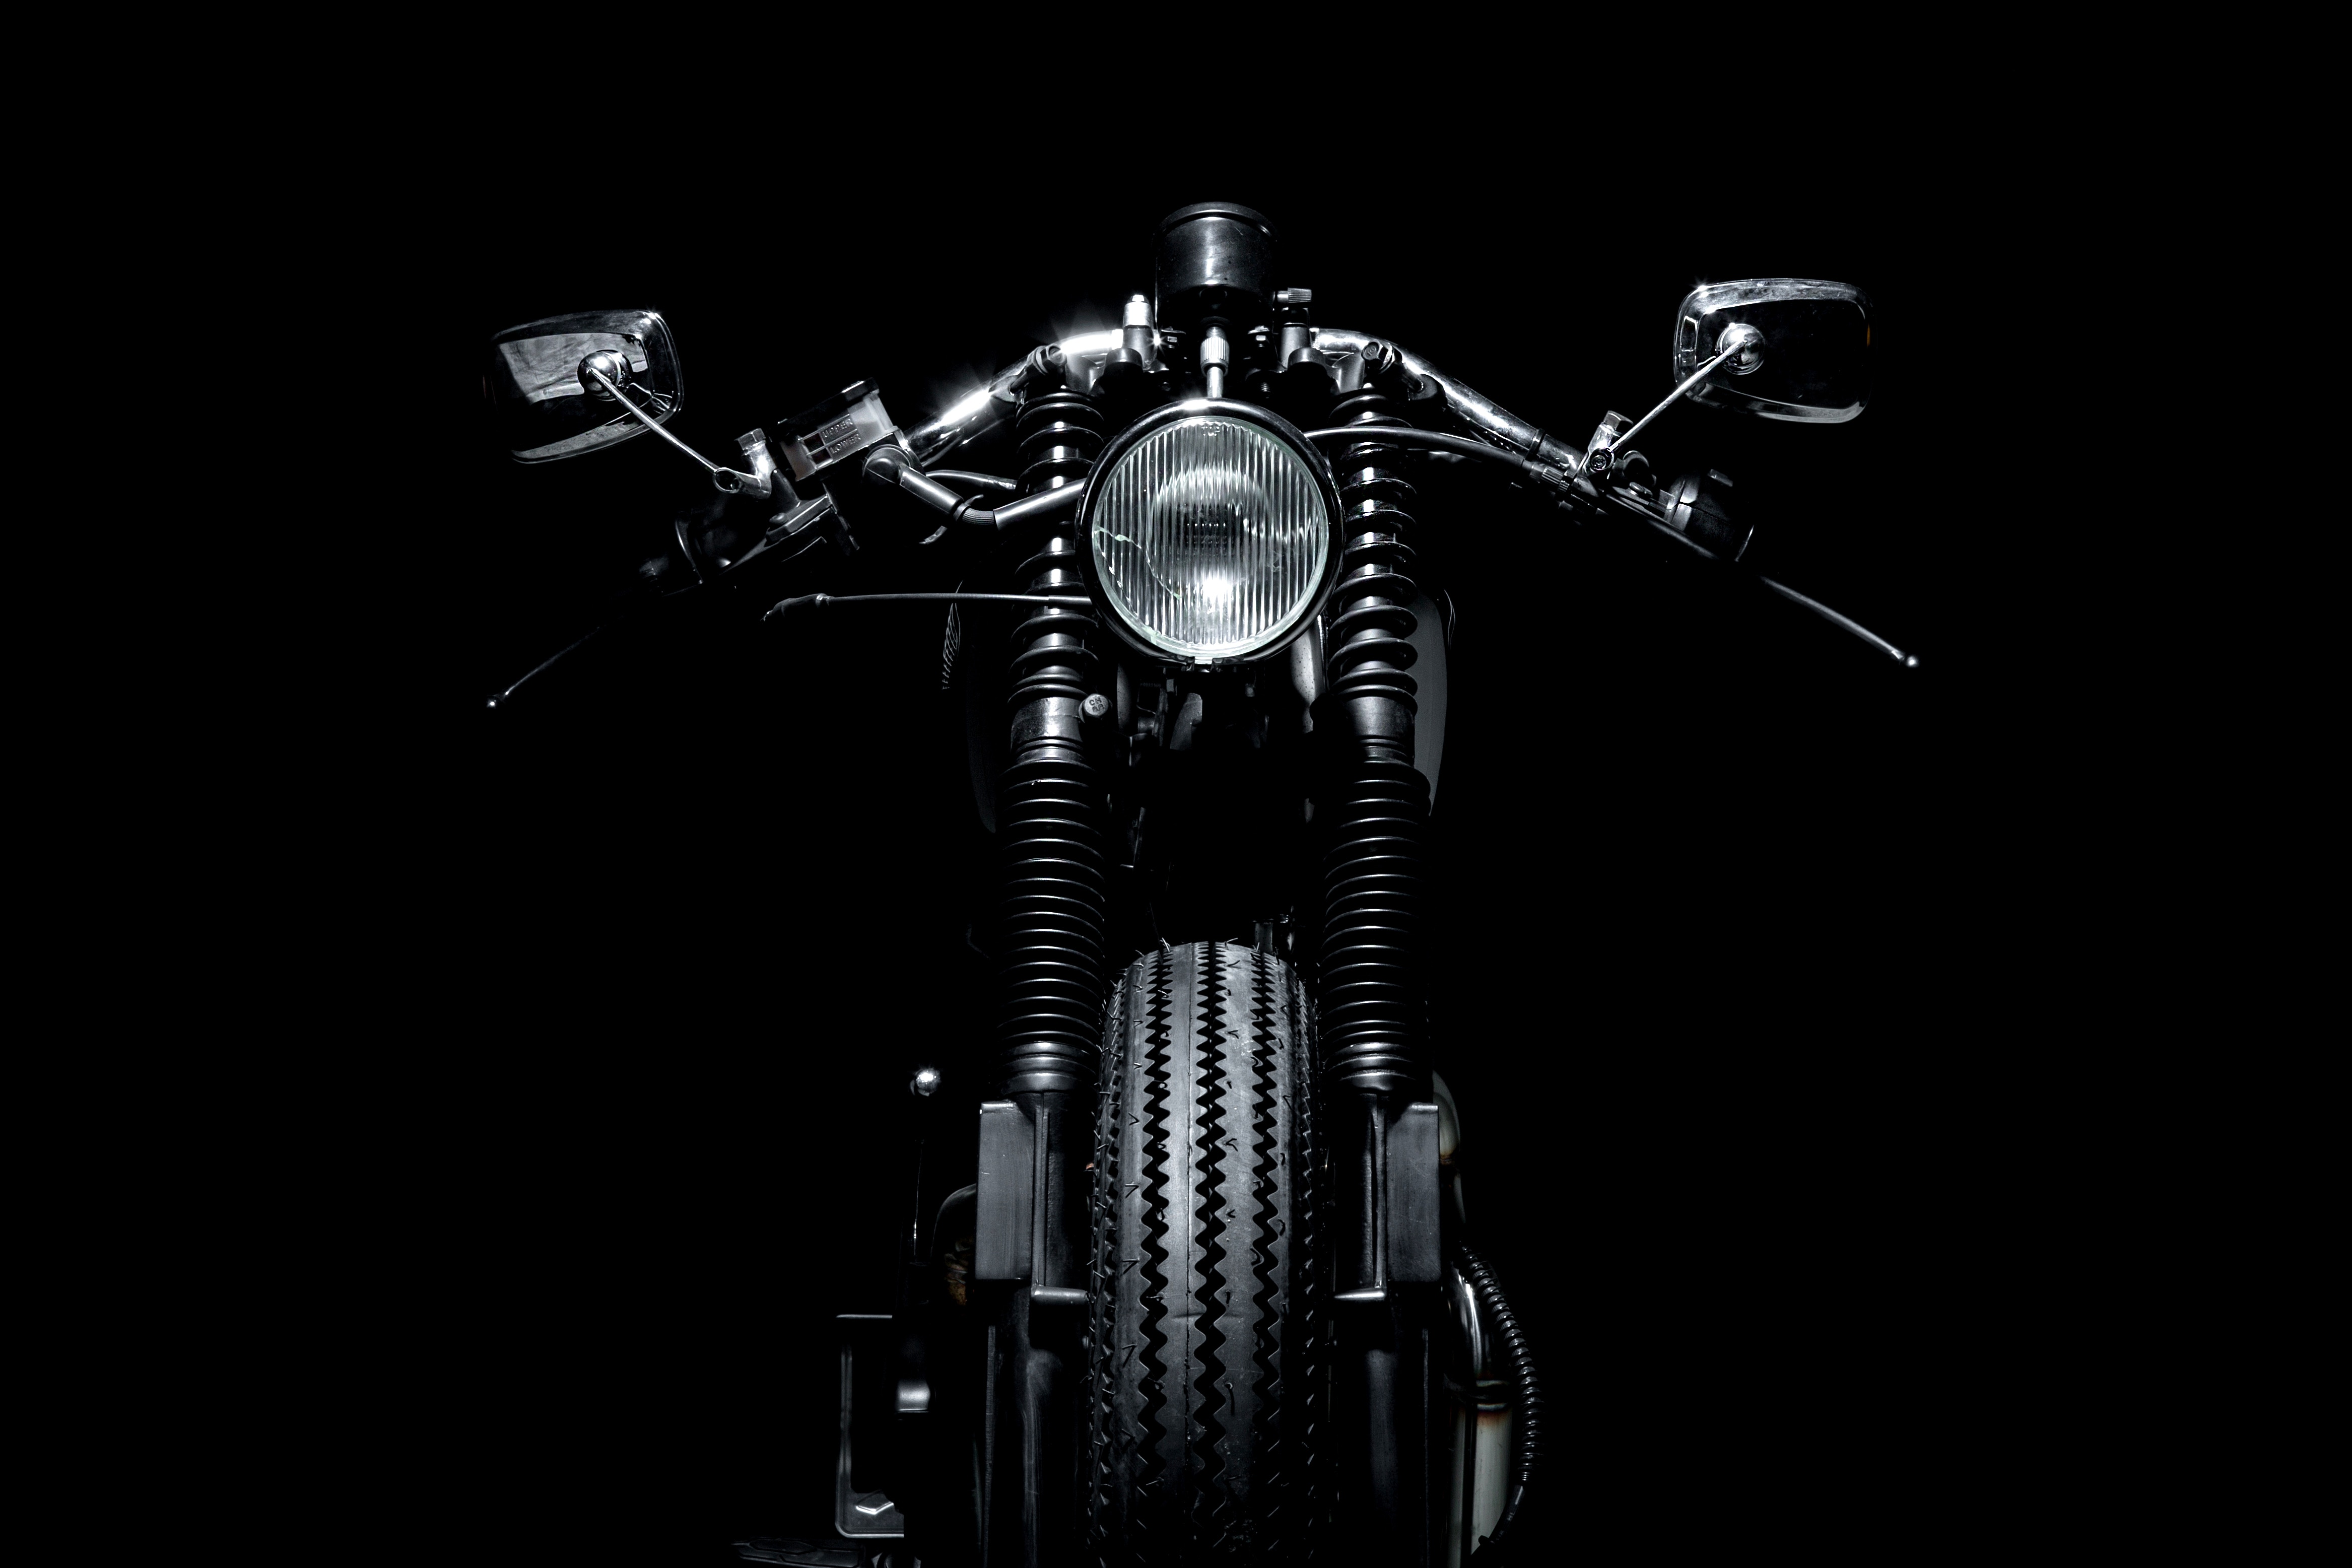 motorcycles, bw, chb, motorcycle, headlight, tire, tyre images